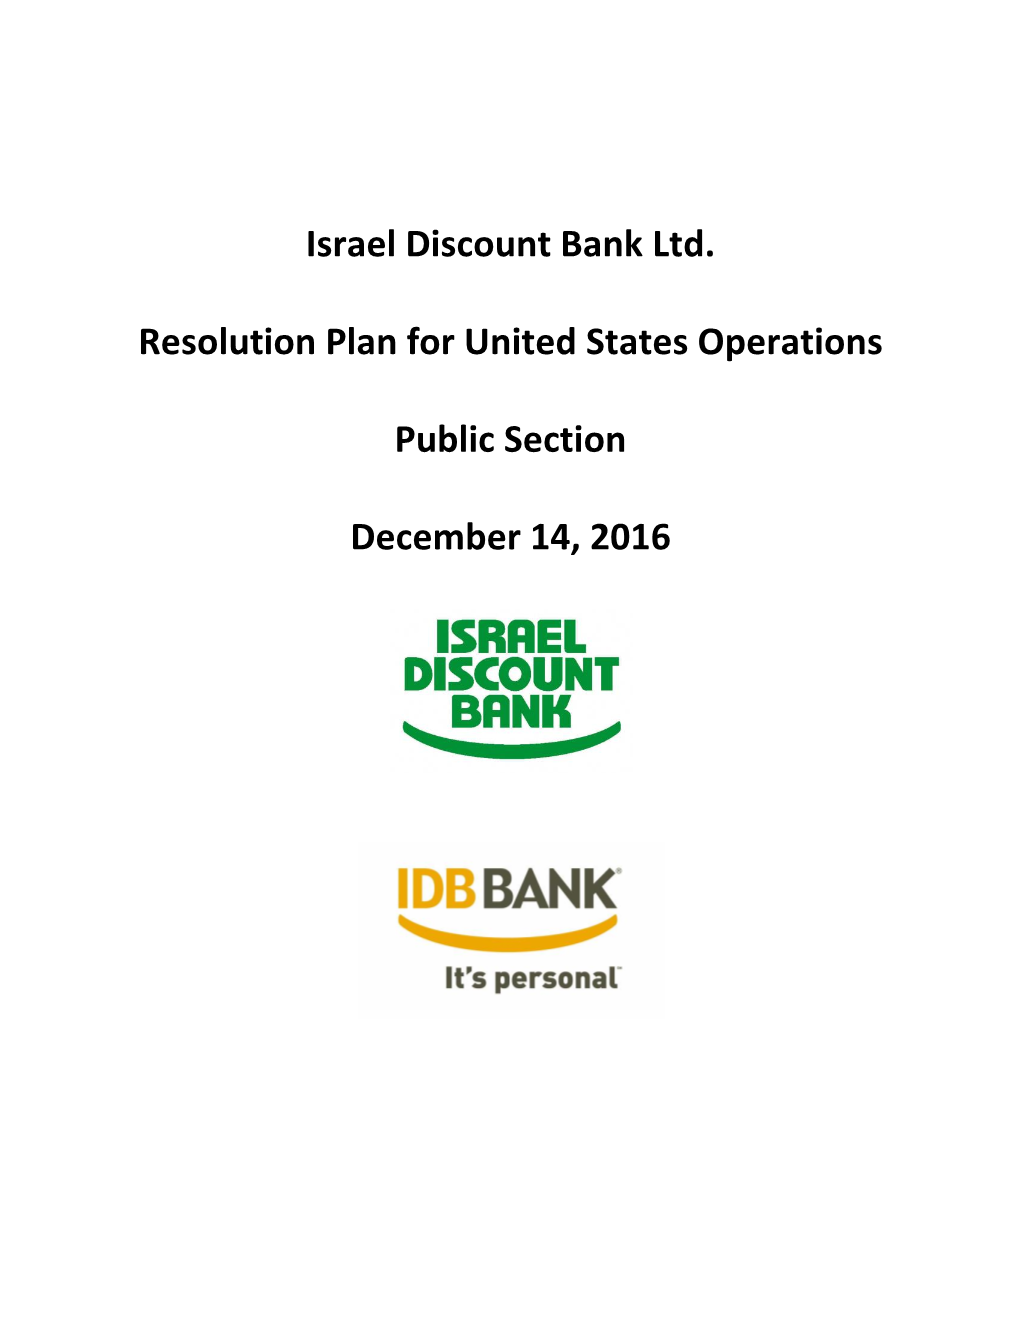 Israel Discount Bank Ltd. Resolution Plan for United States Operations